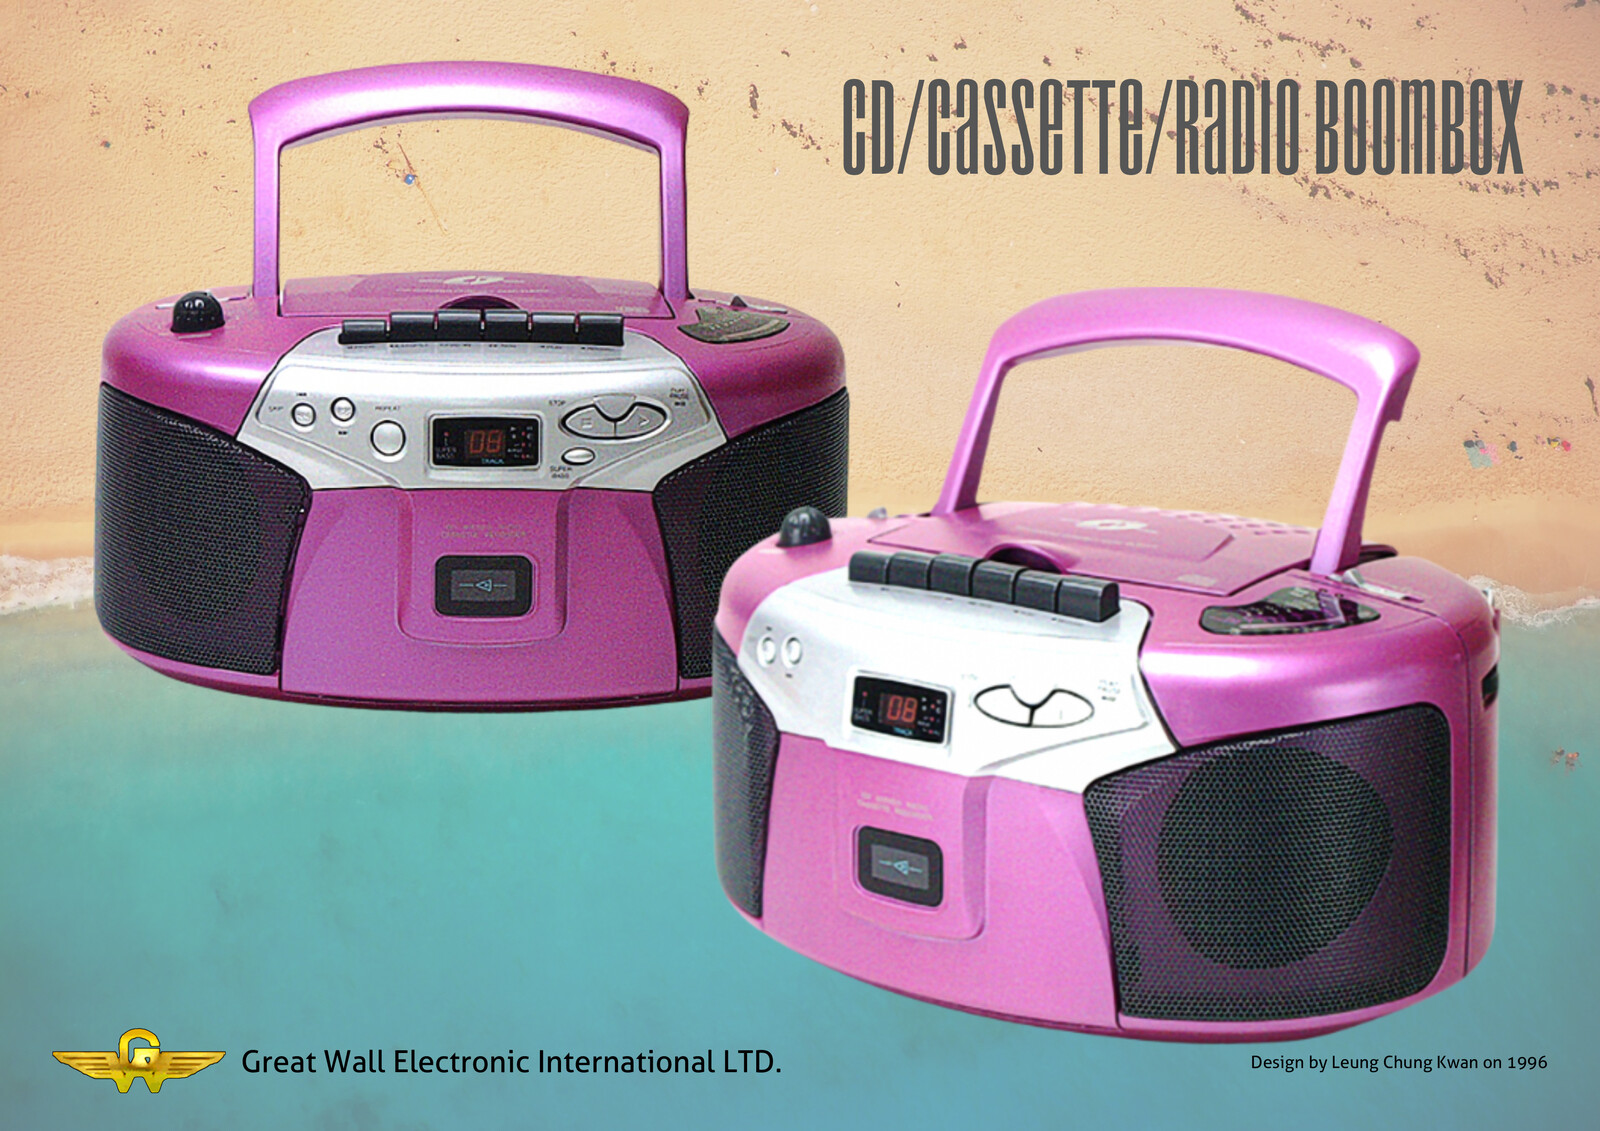 💎 CD / Cassette / AT Radio Boombox | Design by Leung Chung Kwan on 1996 💎
Brand Name︰ALBA / CROWN | Client︰Great Wall Electronics International Limited
More︰http://bit.ly/gw-p16